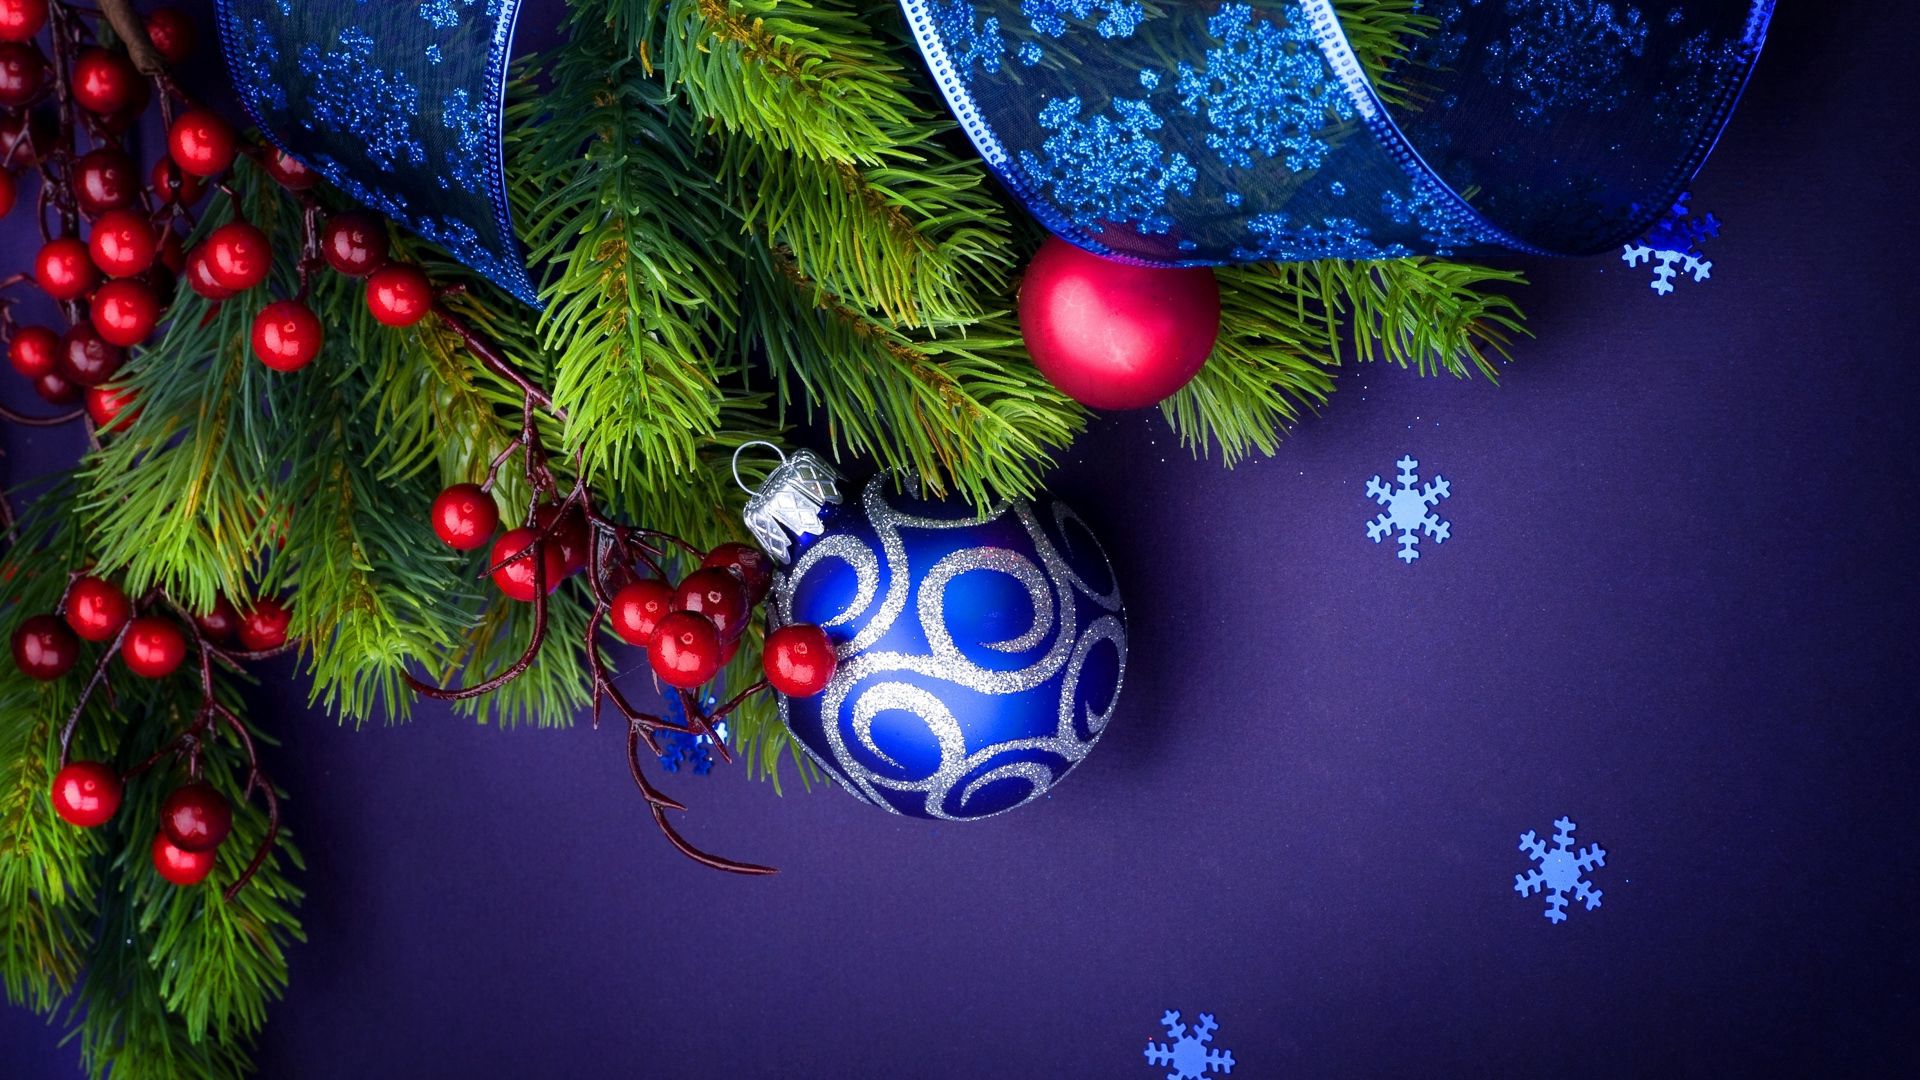 wallpapers ball, holidays, new year, decorations, spruce, fir